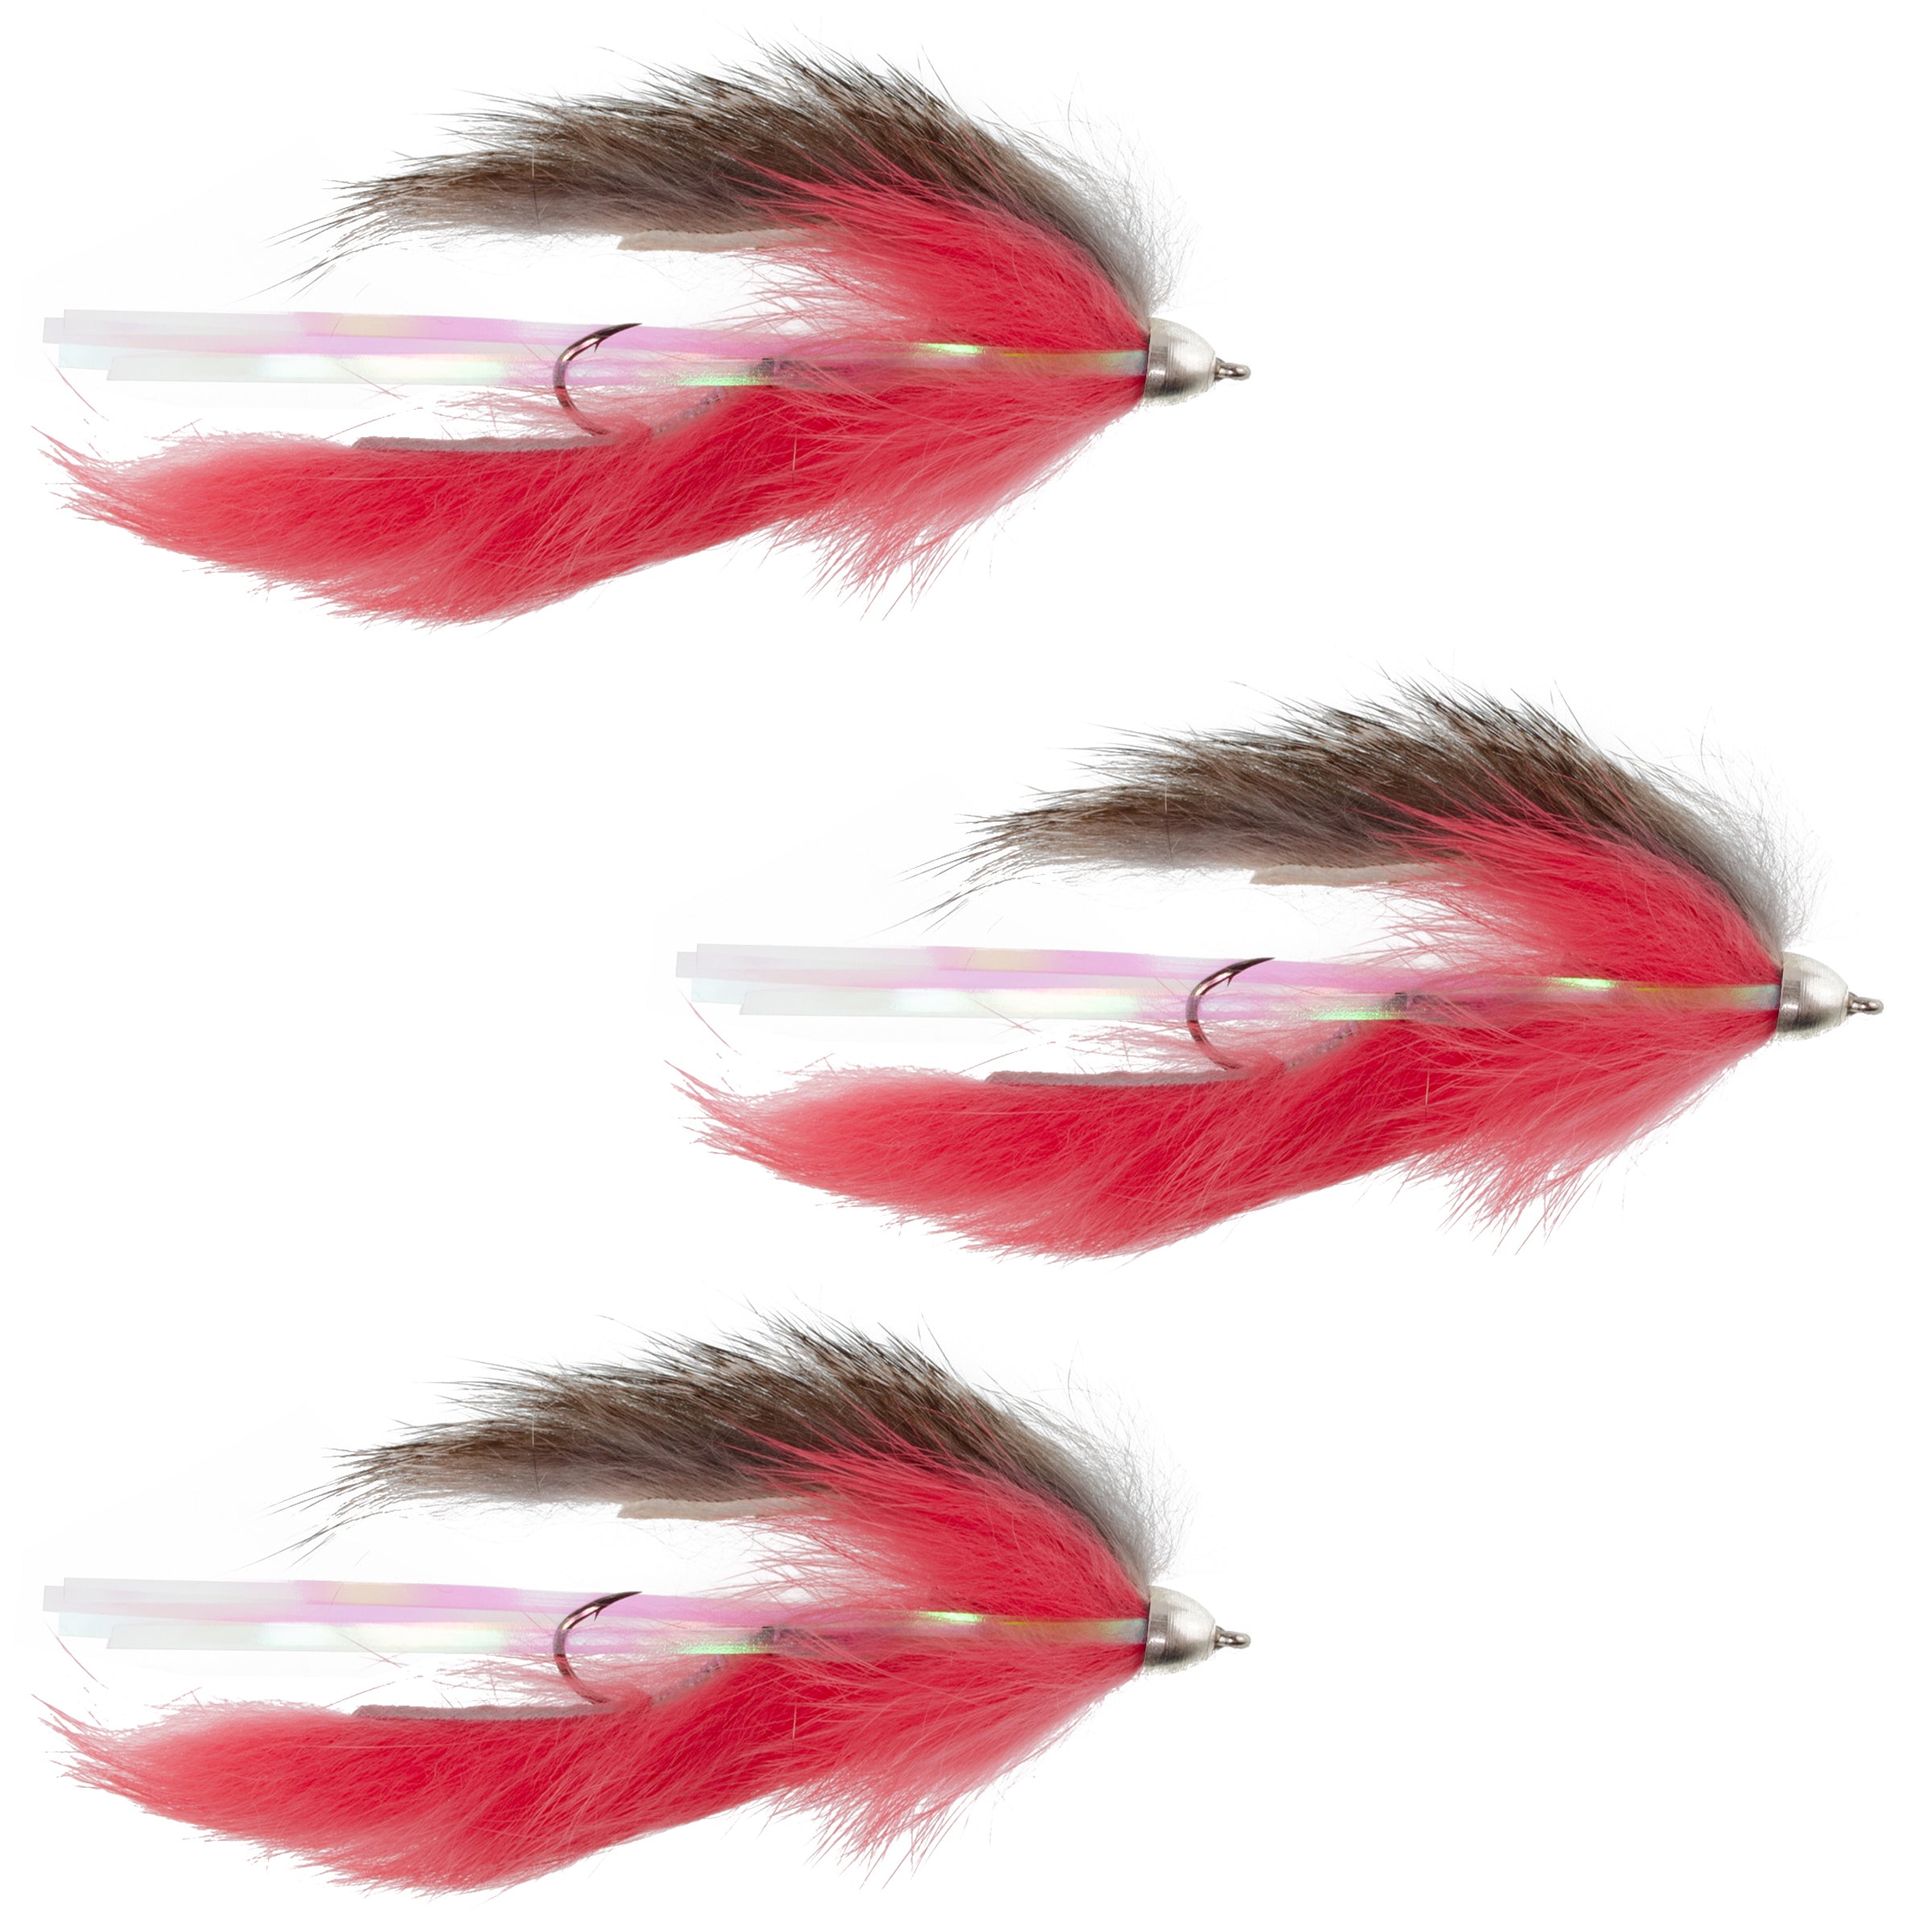 The Fly Fishing Place Dolly Llama Stinger Streamer Flies - 3 Natural and Salmon Steelhead Trout Alaska Fly Fishing Flies - Hook Size 4